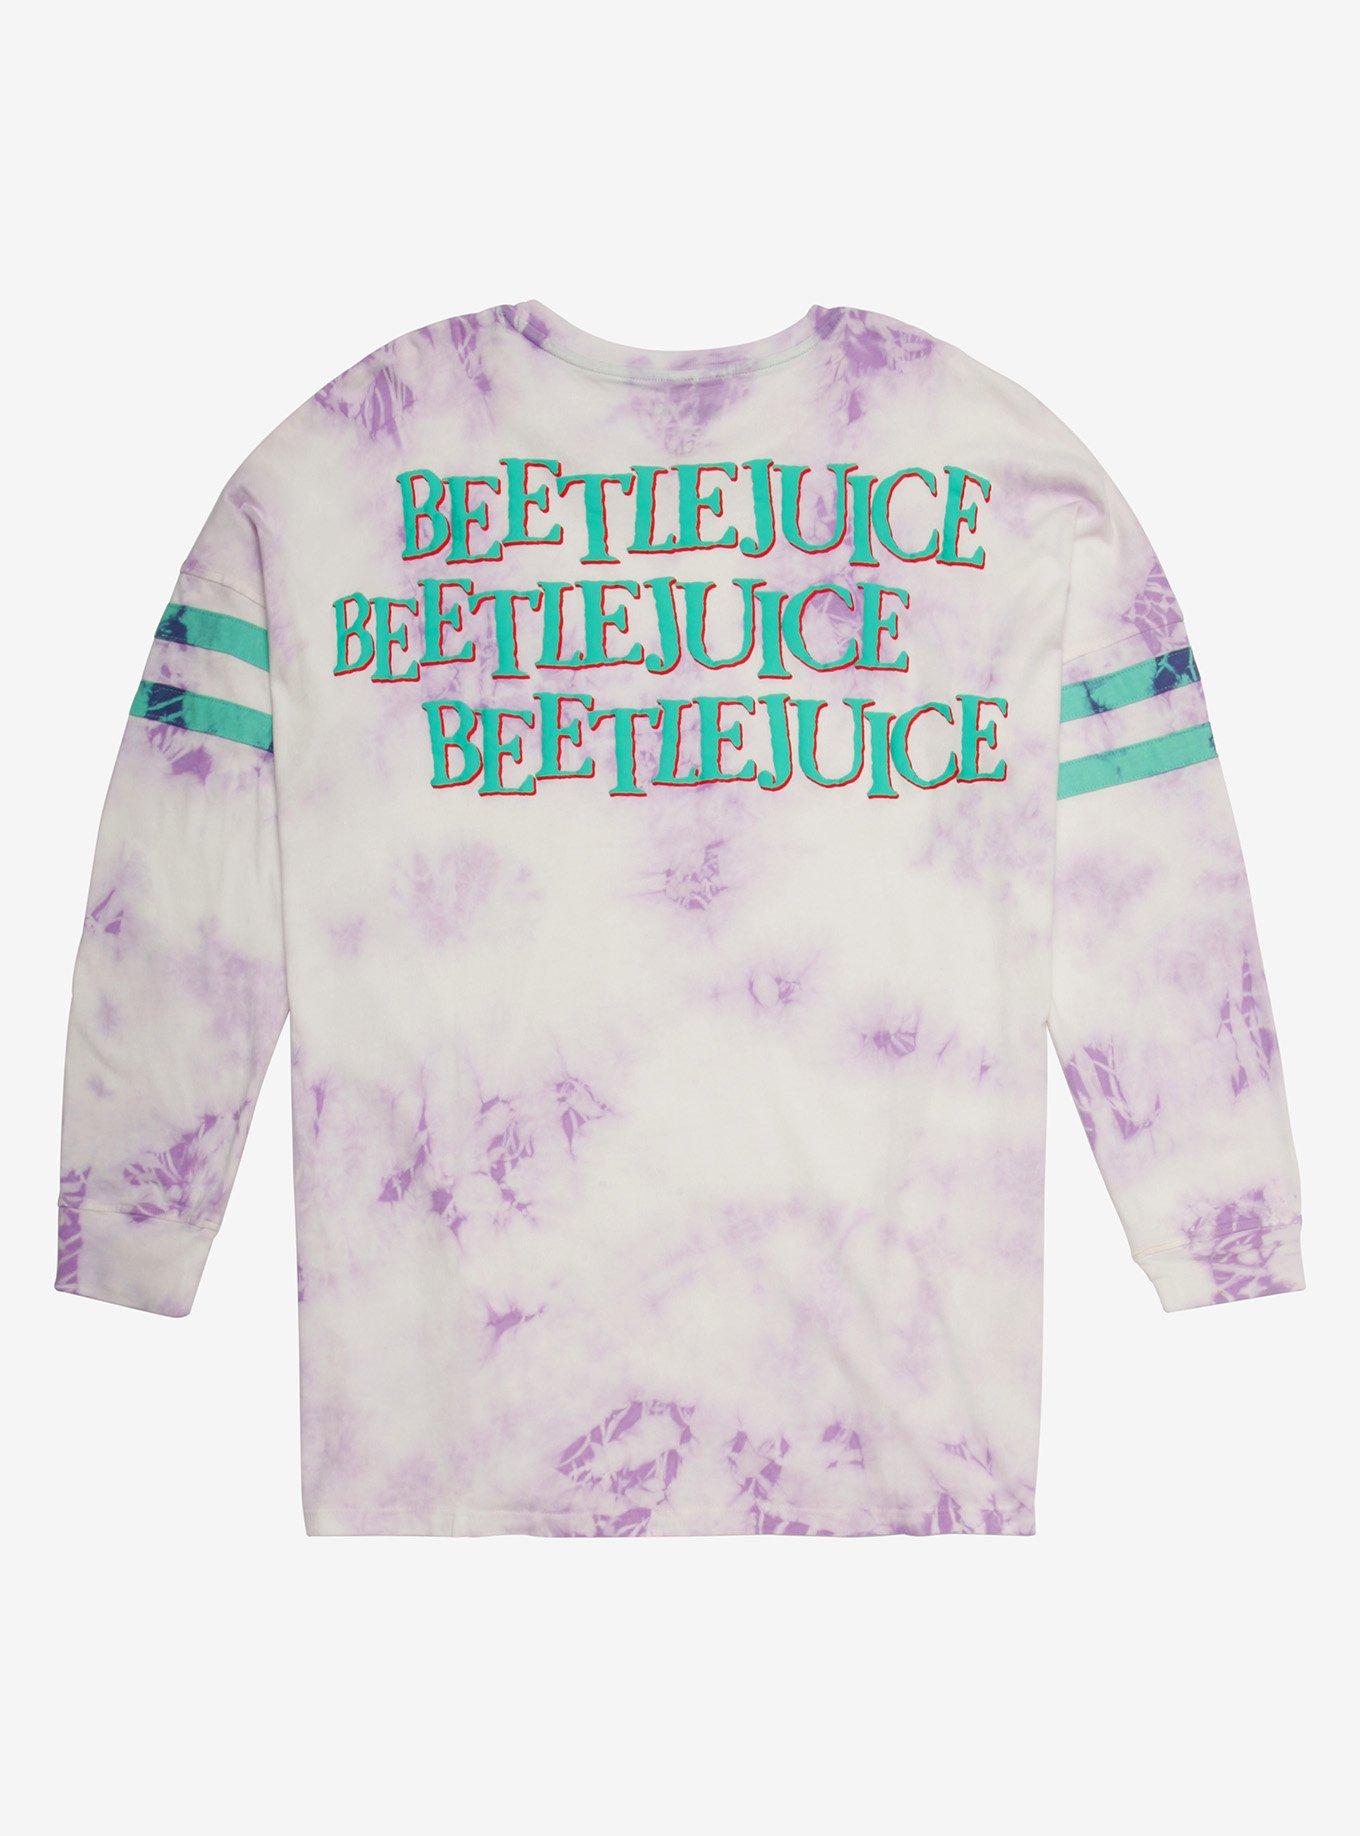 Beetlejuice Sandworm Tie-Dye Hype Jersey - BoxLunch Exclusive | BoxLunch